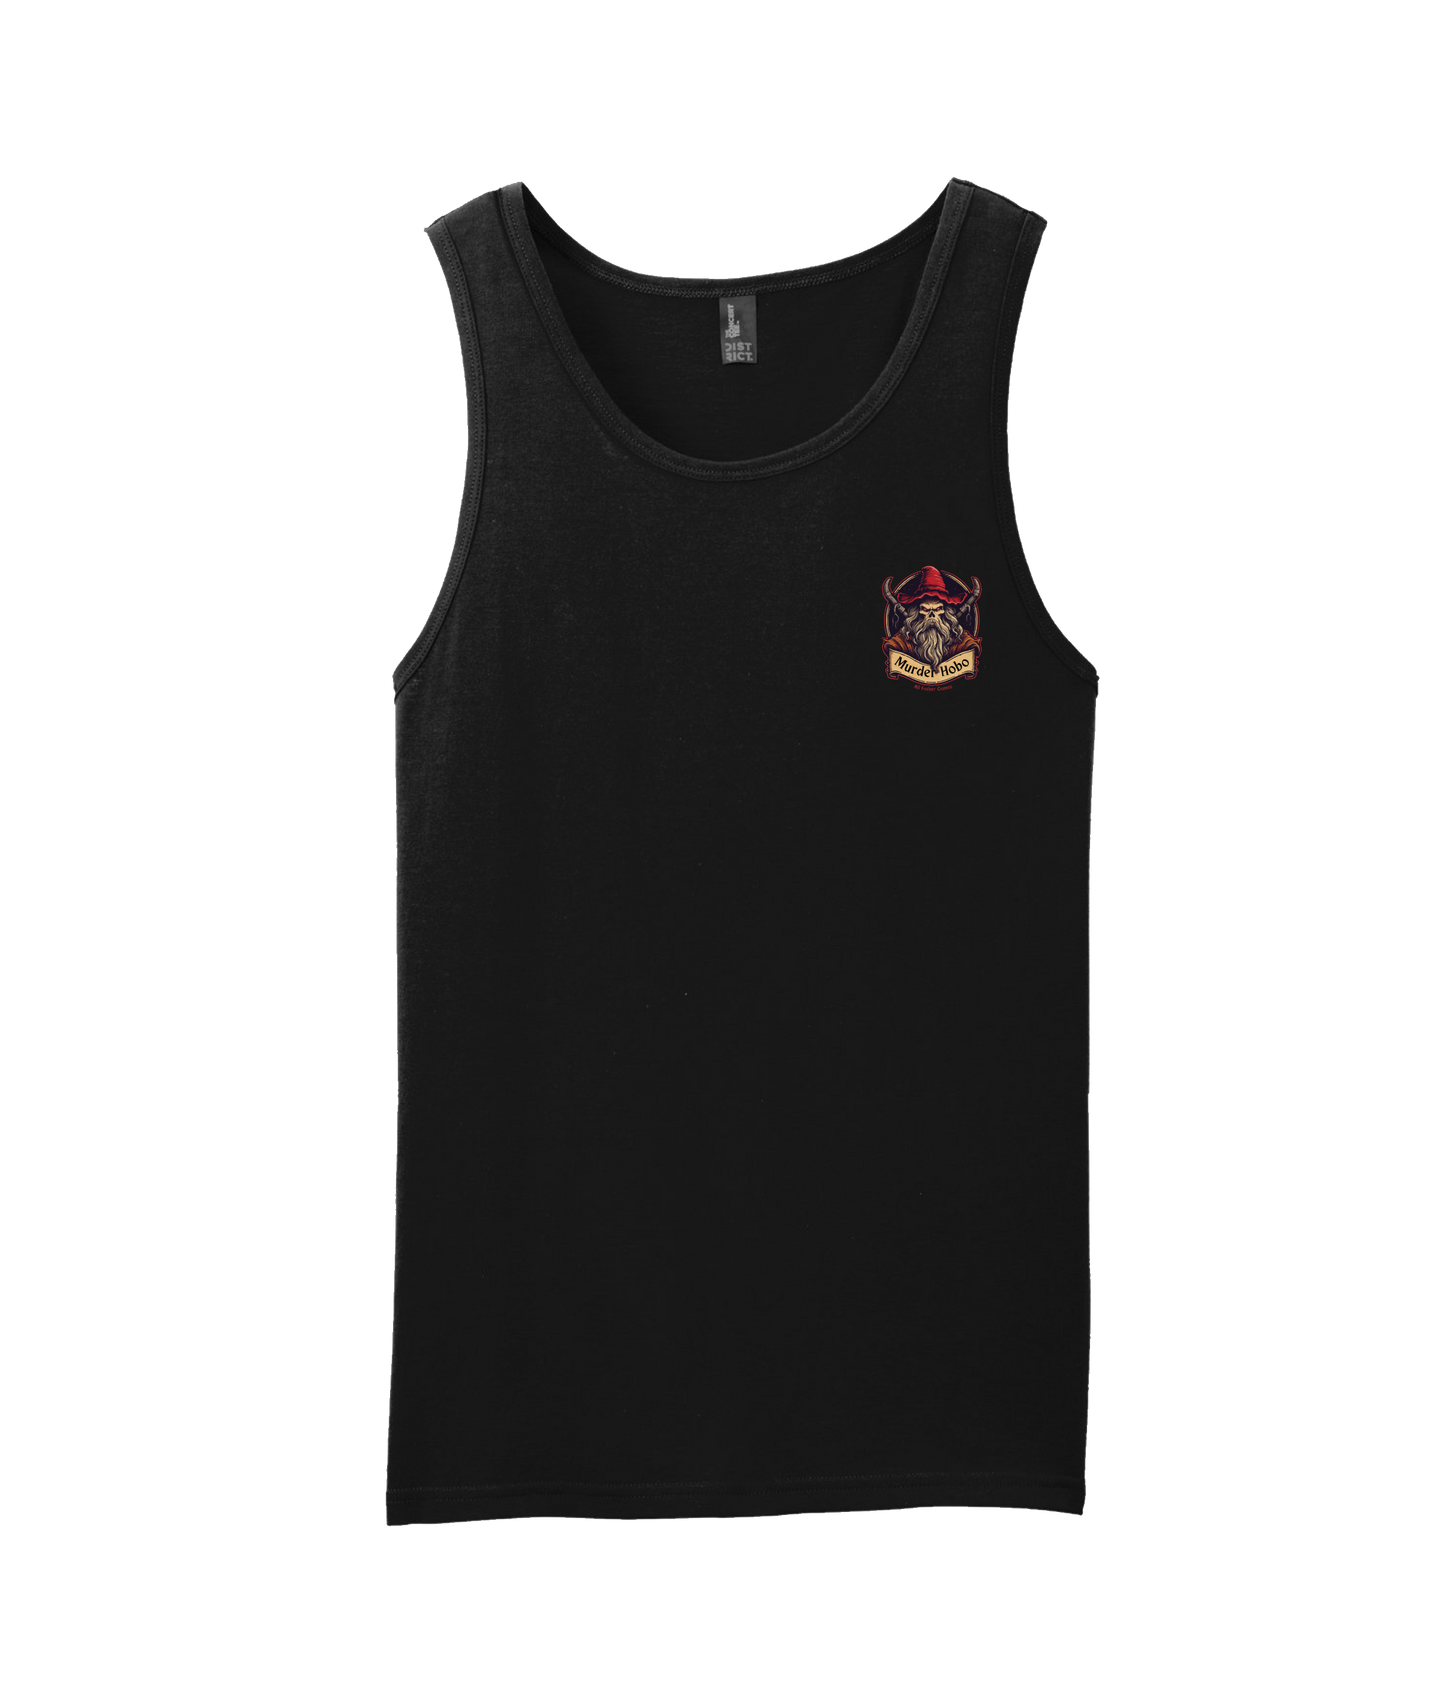 All Father Games - MURDER HOBO - Black Tank Top